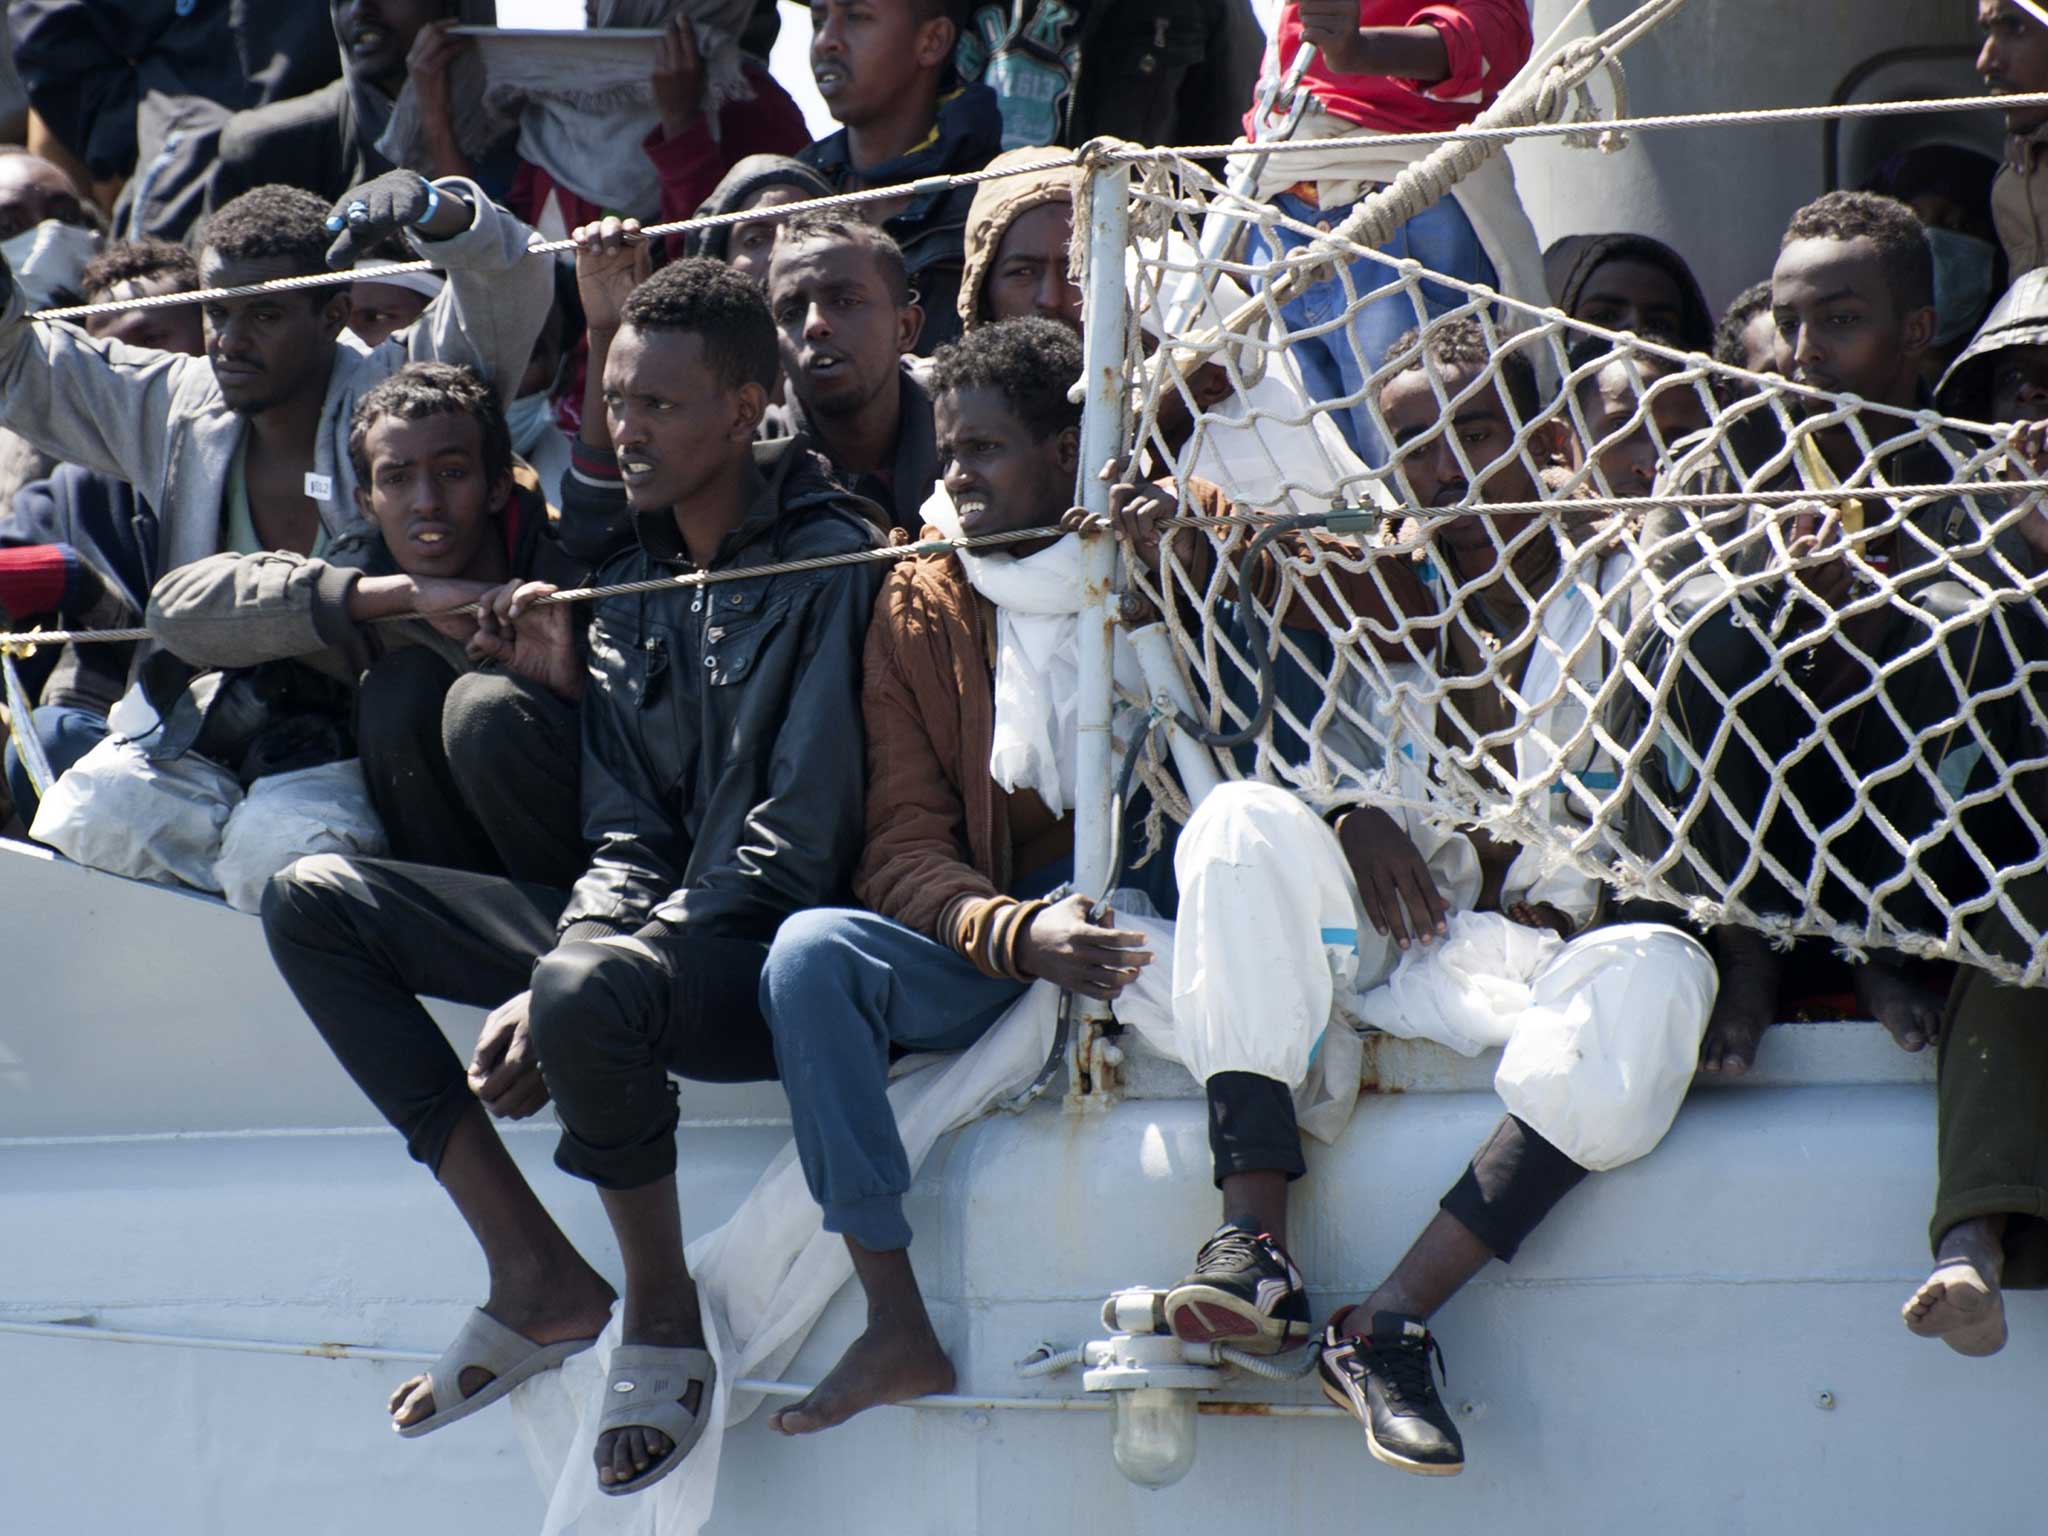 Isis fighters are taking advantage of the migrant boat crisis in the Mediterranean